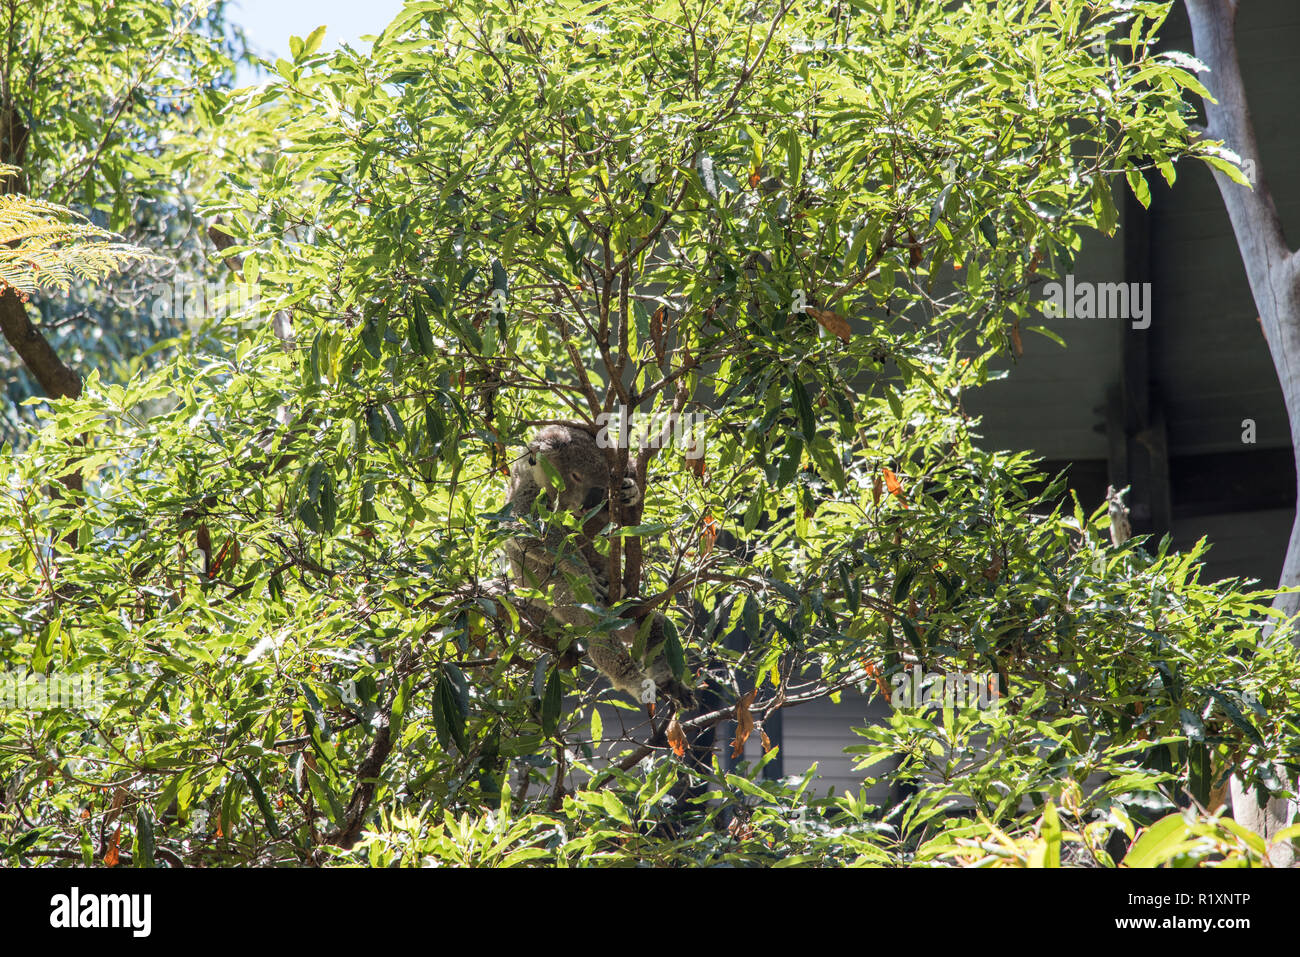 Koala perched on branch in leafy tree on a sunny day in Sydney, Australia Stock Photo